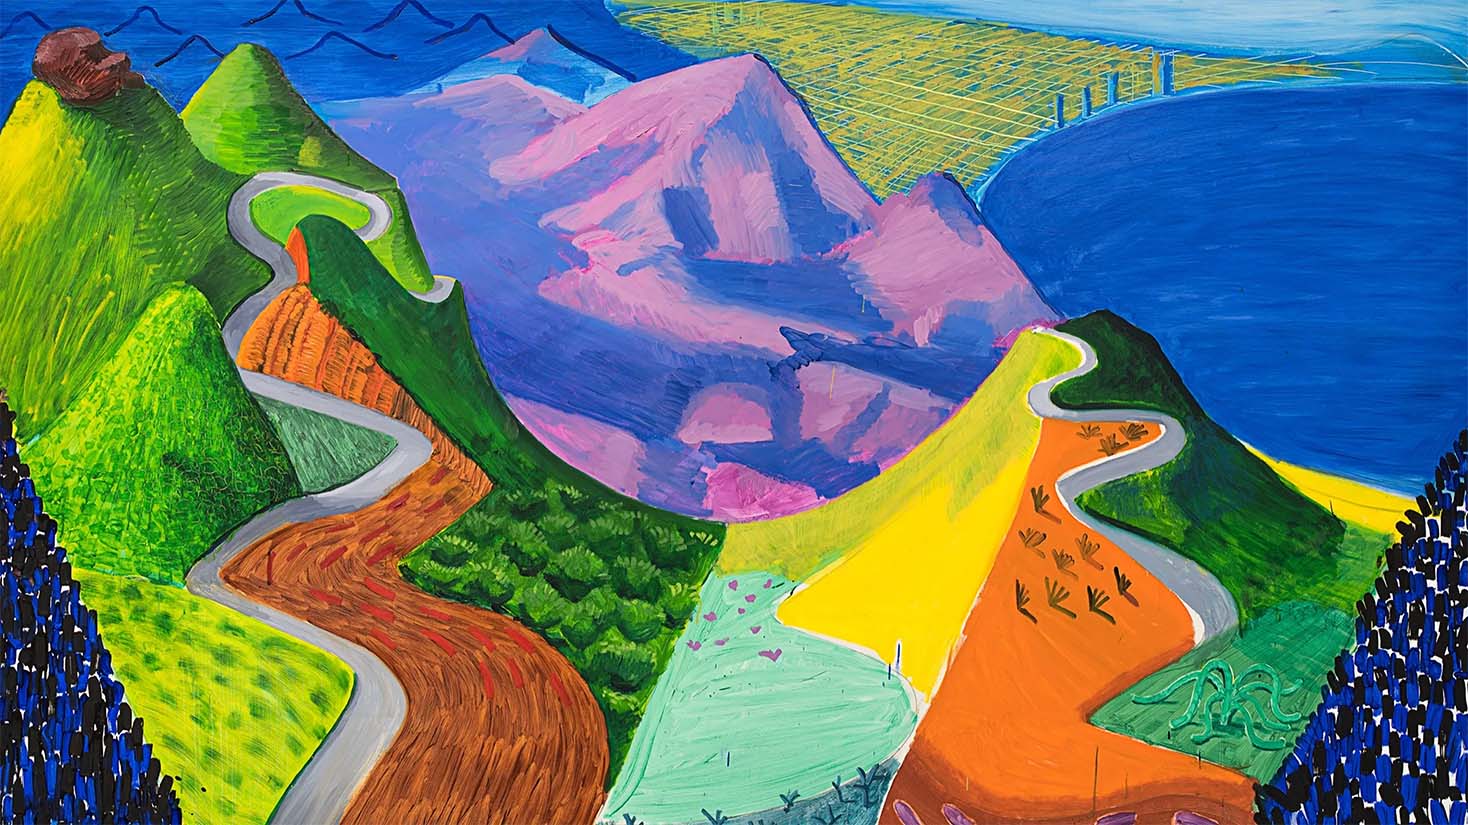 A colorful landscape depicts winding roads and an ocean